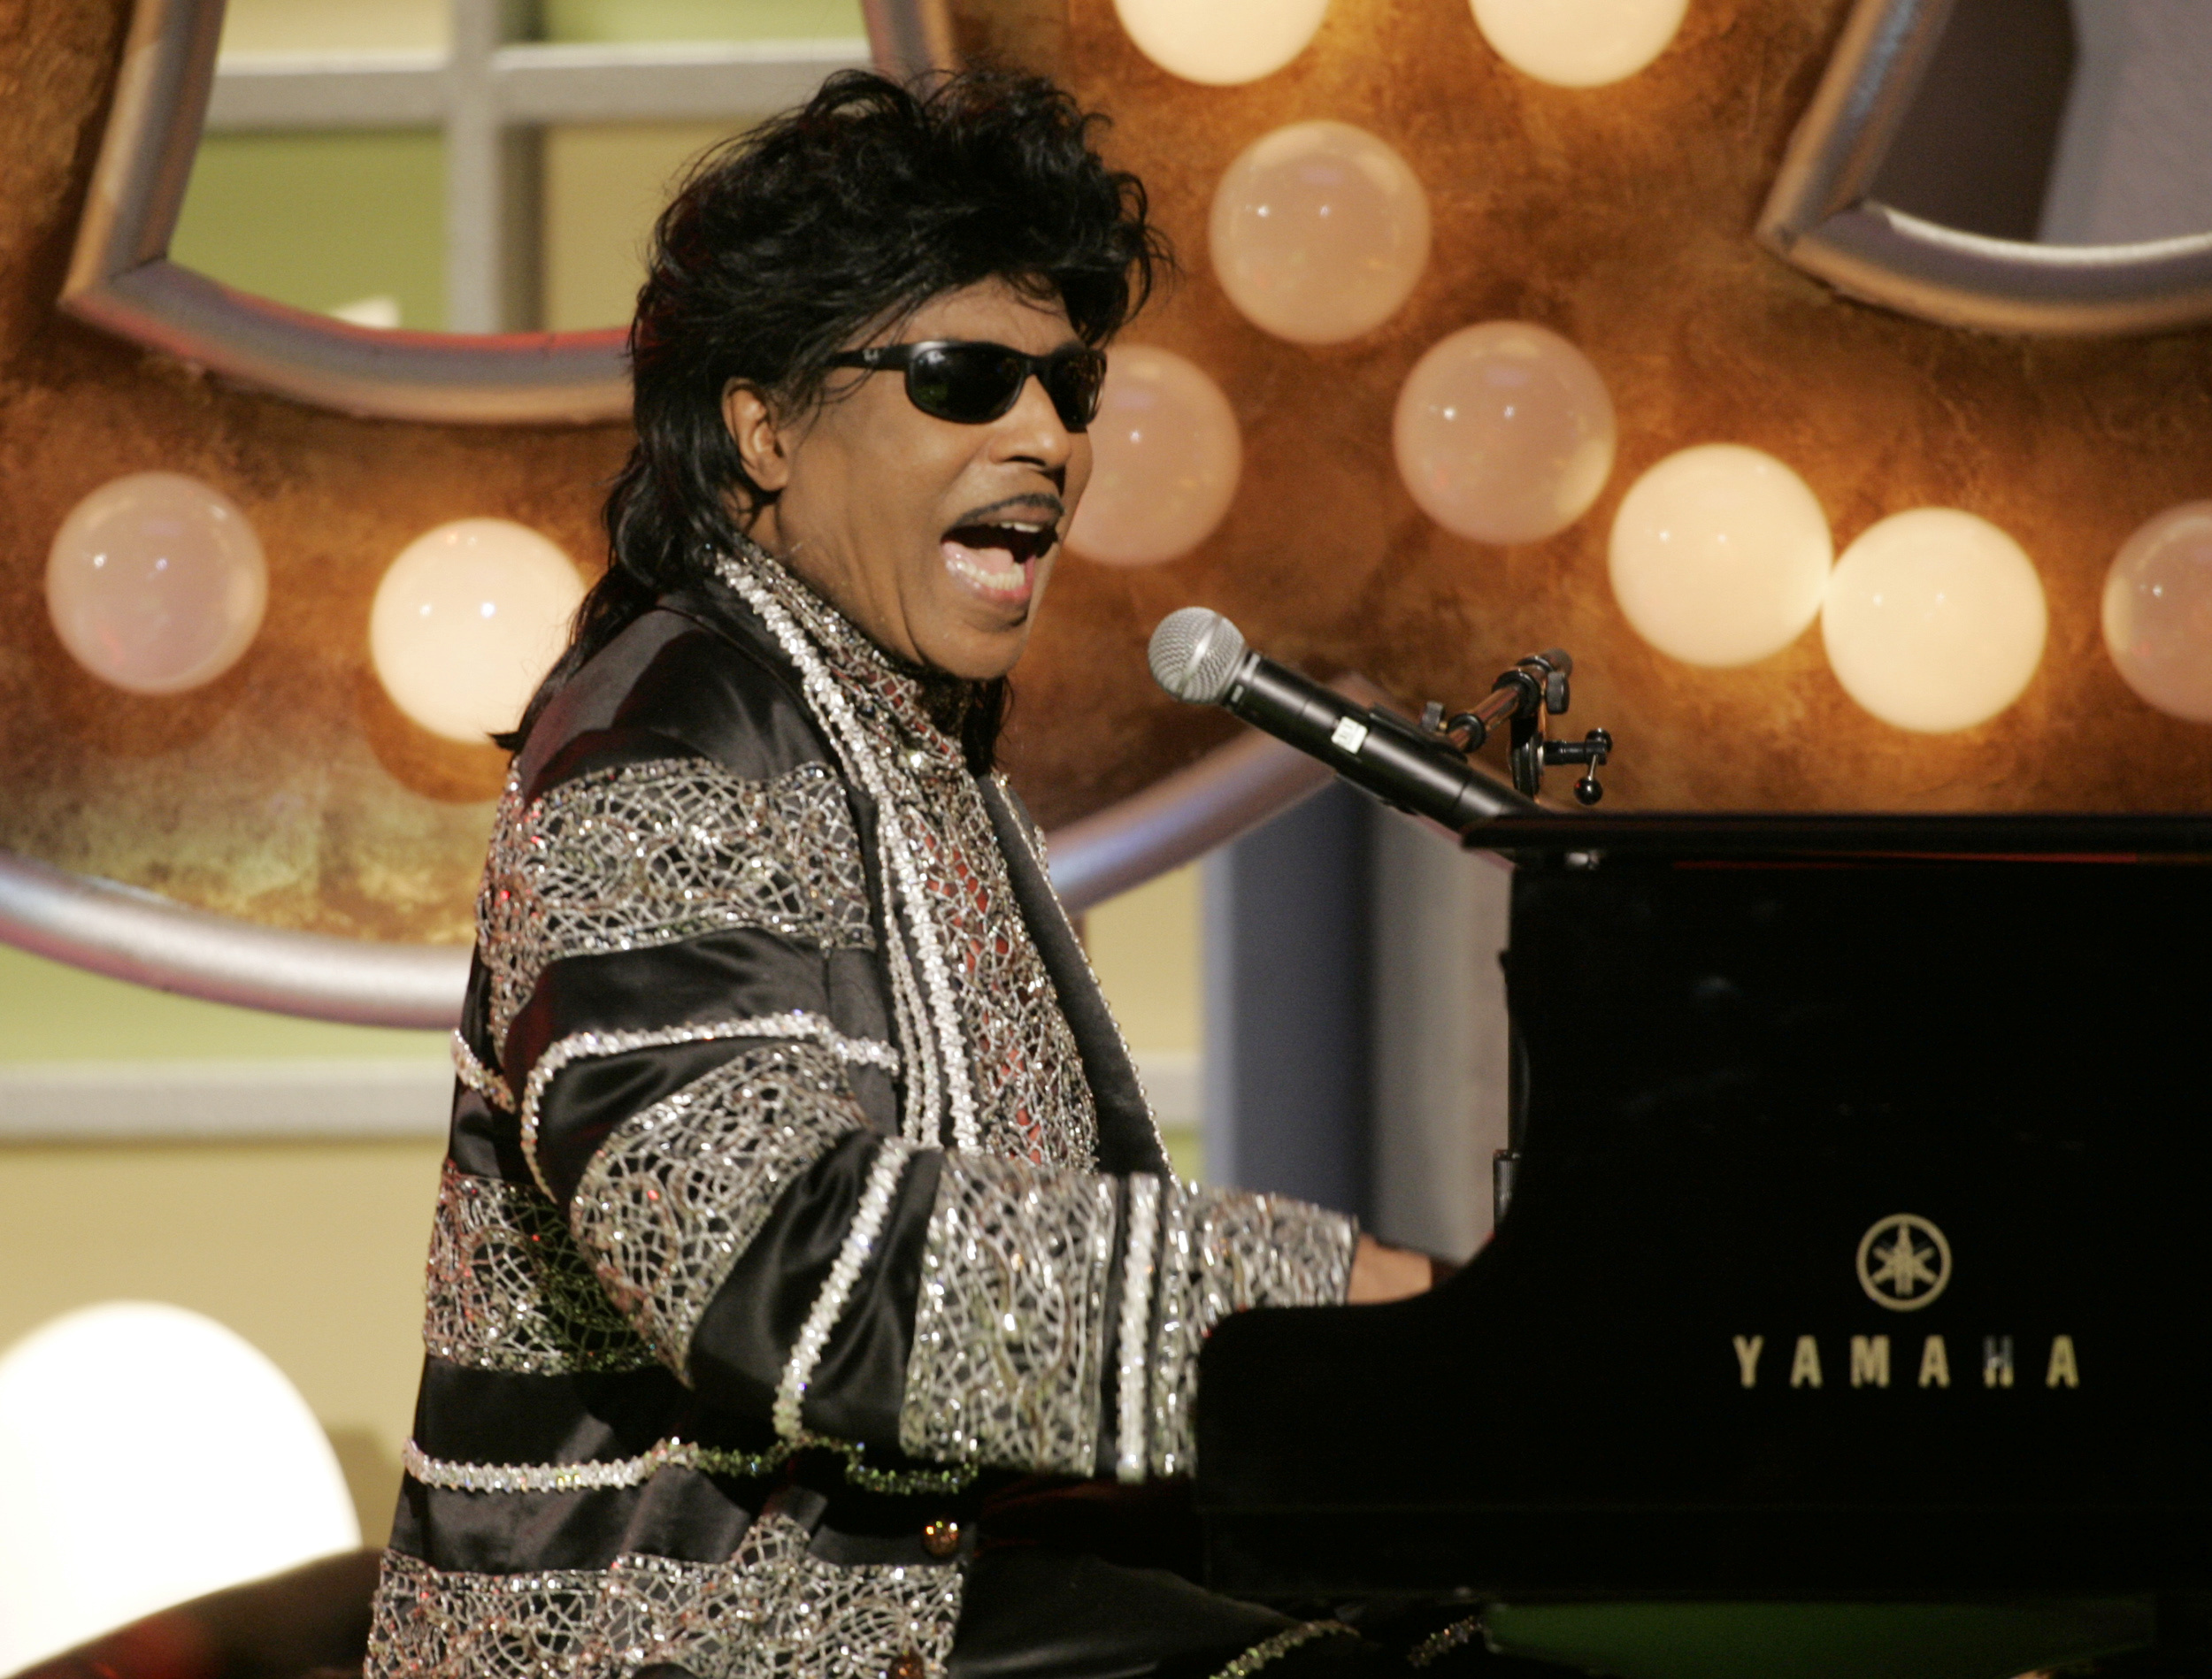 FILE PHOTO: Singer Little Richard performs at 3rd annual TV Land Awards show.